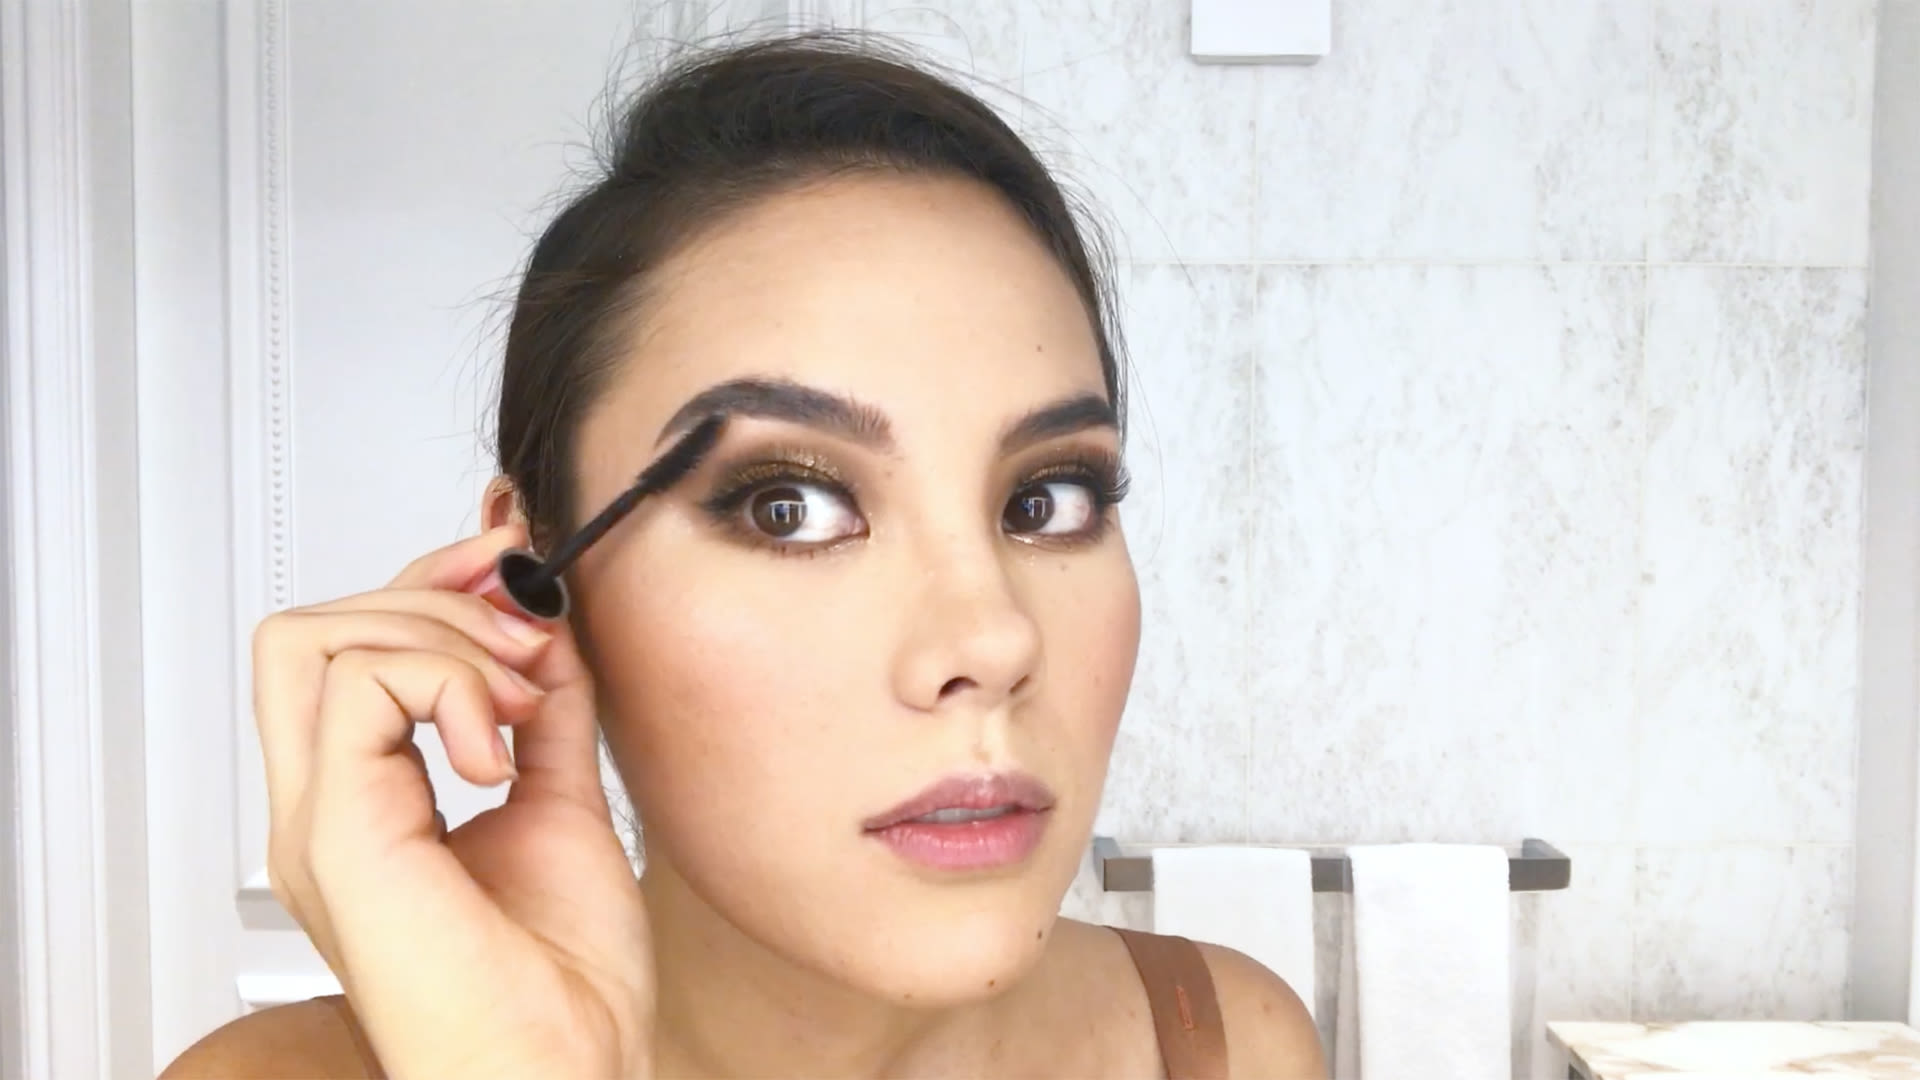 Catriona Gray Xxx - Watch Watch Catriona Gray Do the Makeup She Wore to Win Miss Universe |  Beauty Secrets | Vogue